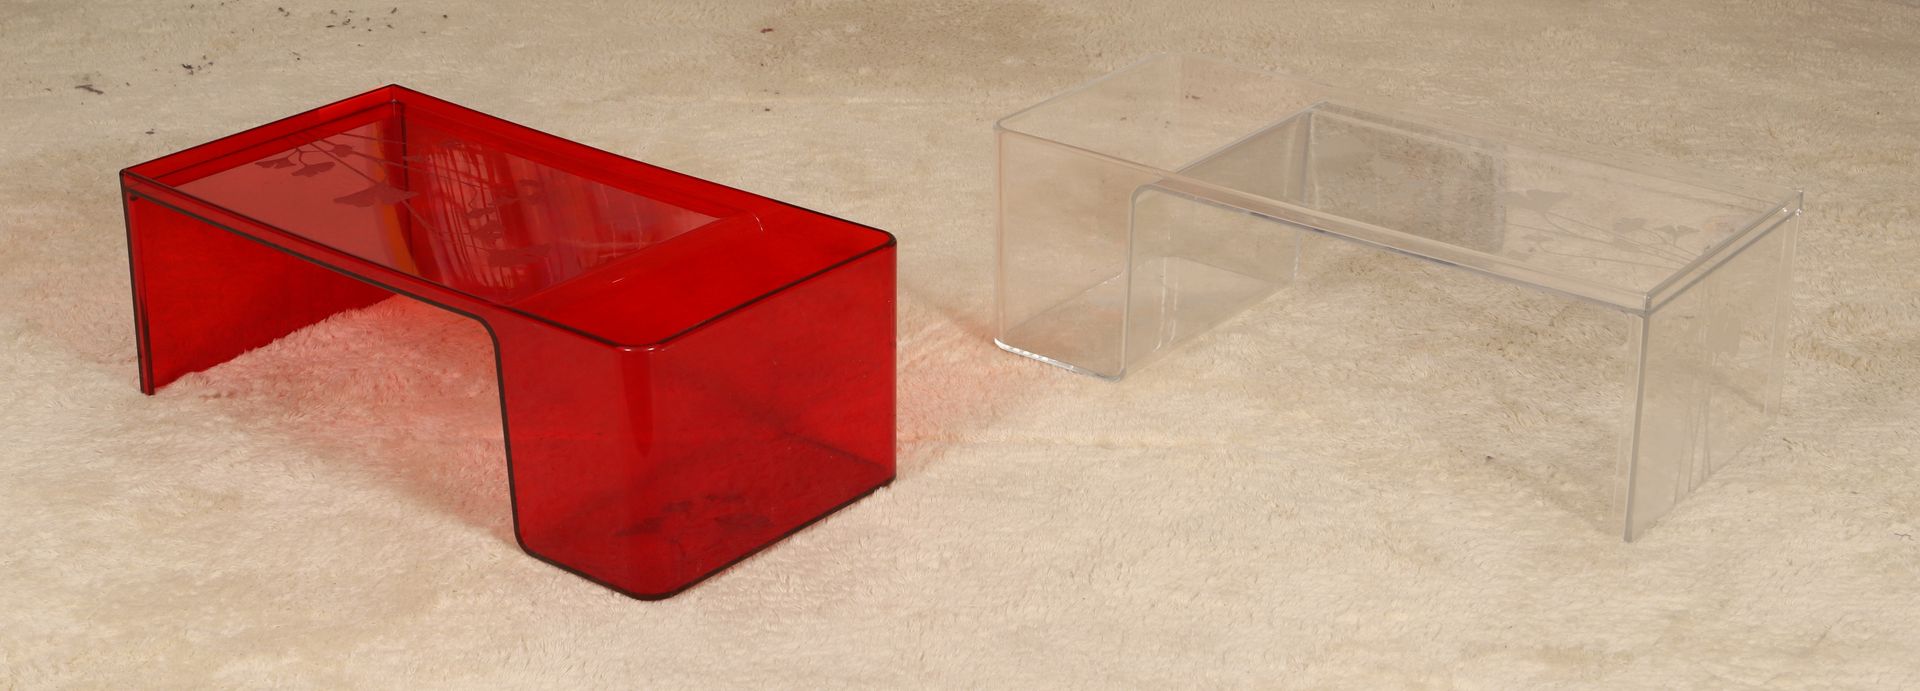 Null Coffee tables model "Usame" by Patricia Urquiola, ed. Kartell 

Set of 2 co&hellip;